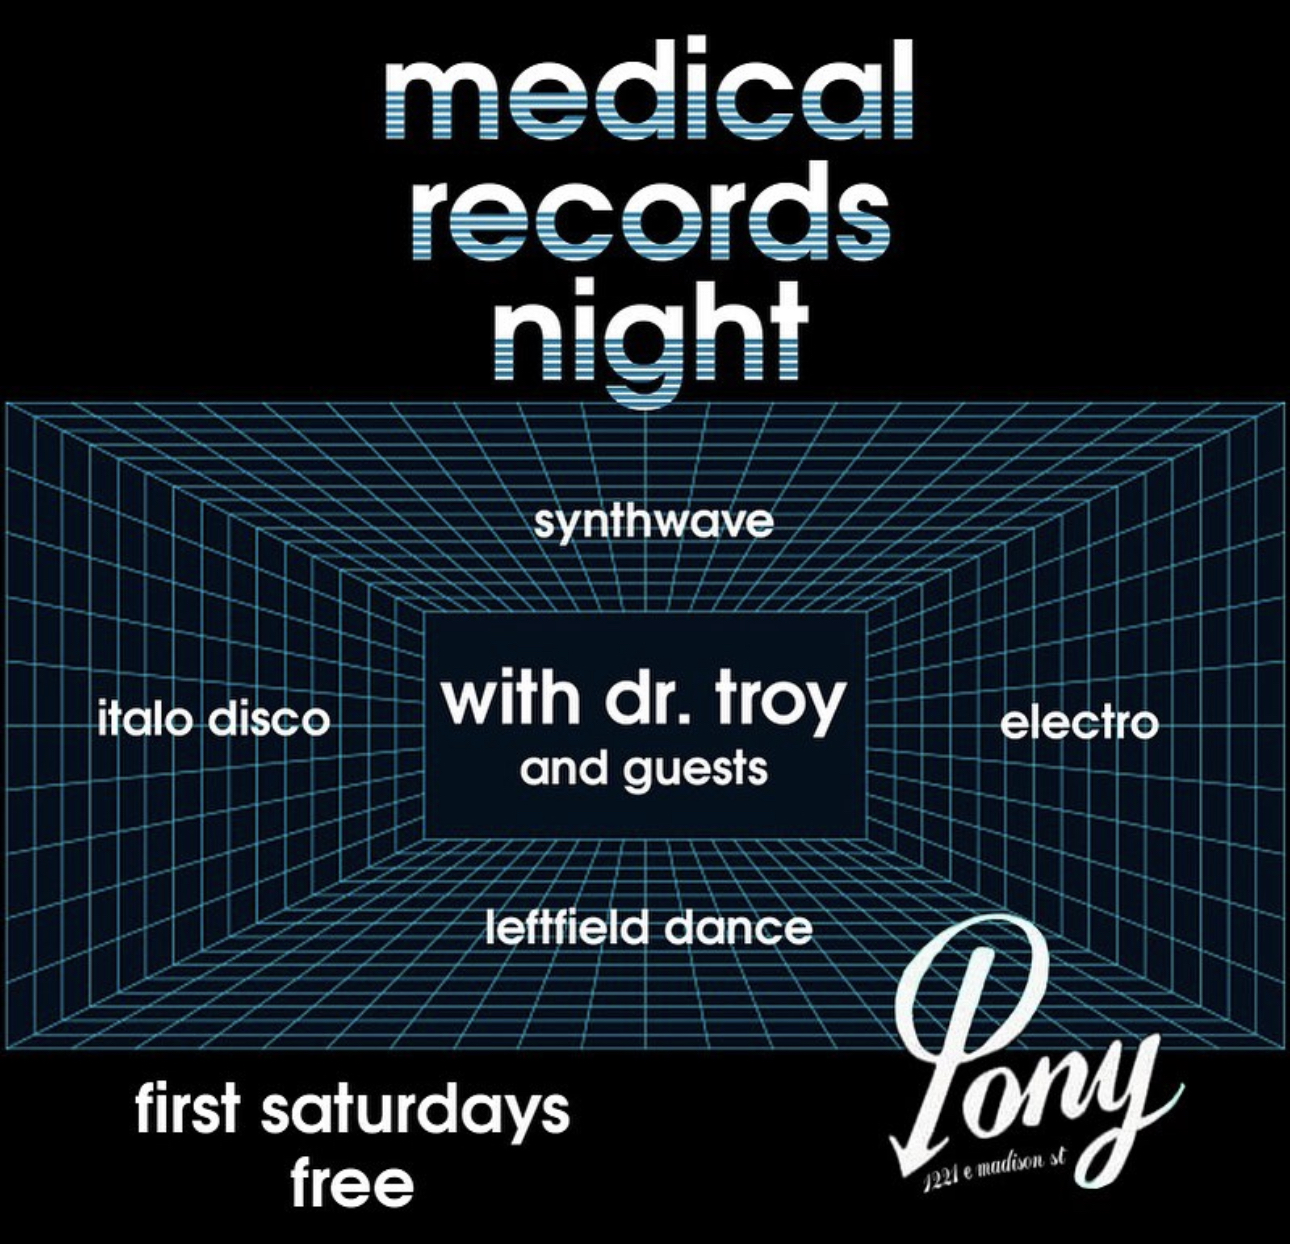 Pony 1st Saturdays Italo Disco, Synthwave, Electro, and Leftfield Dance with Dr Tony. No cover.